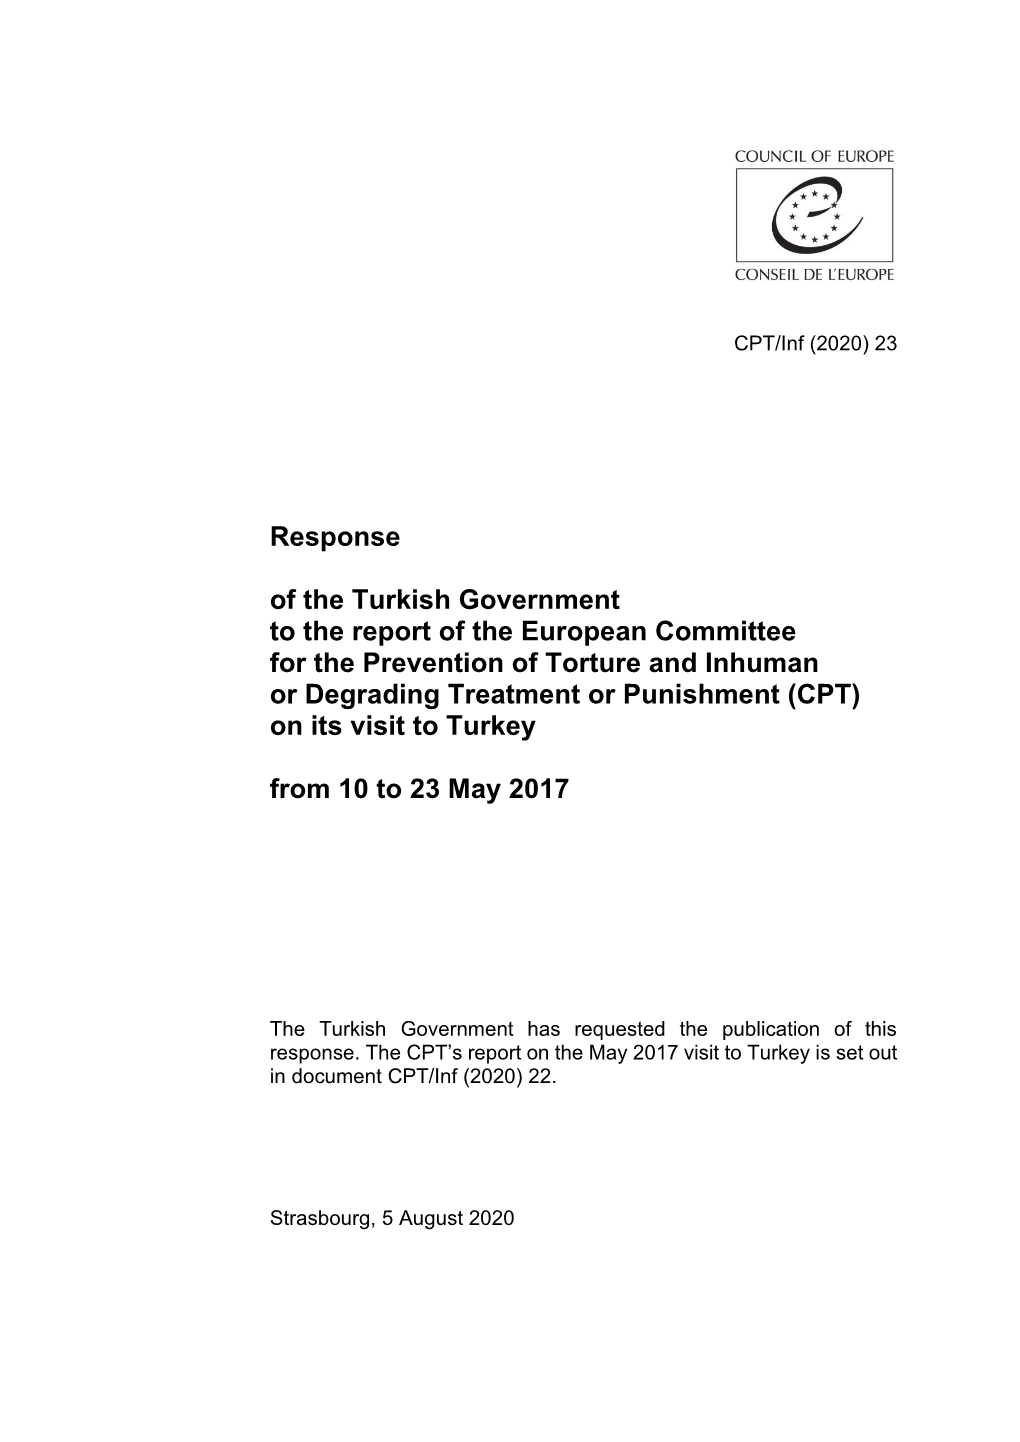 Response of the Turkish Government to the Report of the European